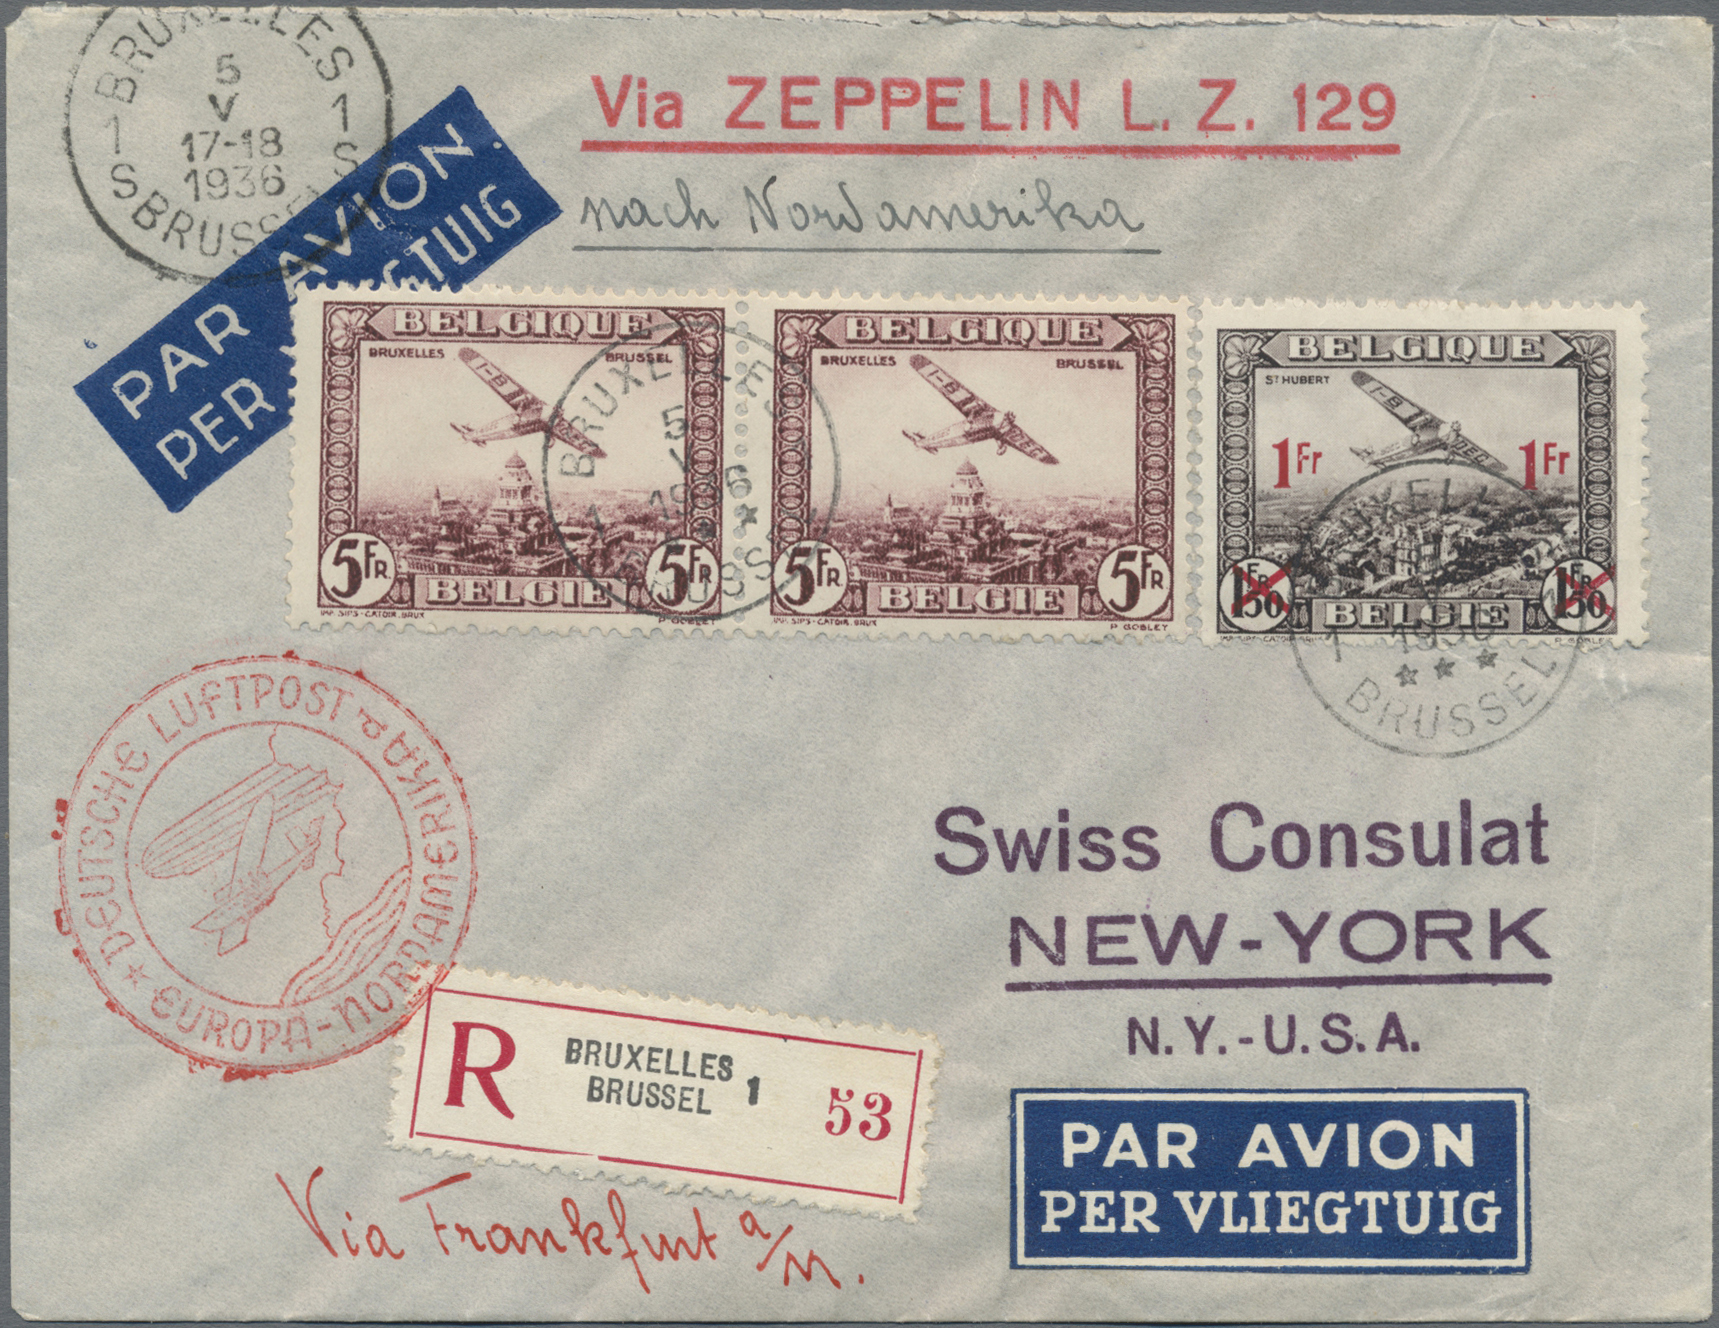 Lot 3673 - zeppelinpost europa  -  Auktionshaus Christoph Gärtner GmbH & Co. KG 54th AUCTION - Day 2